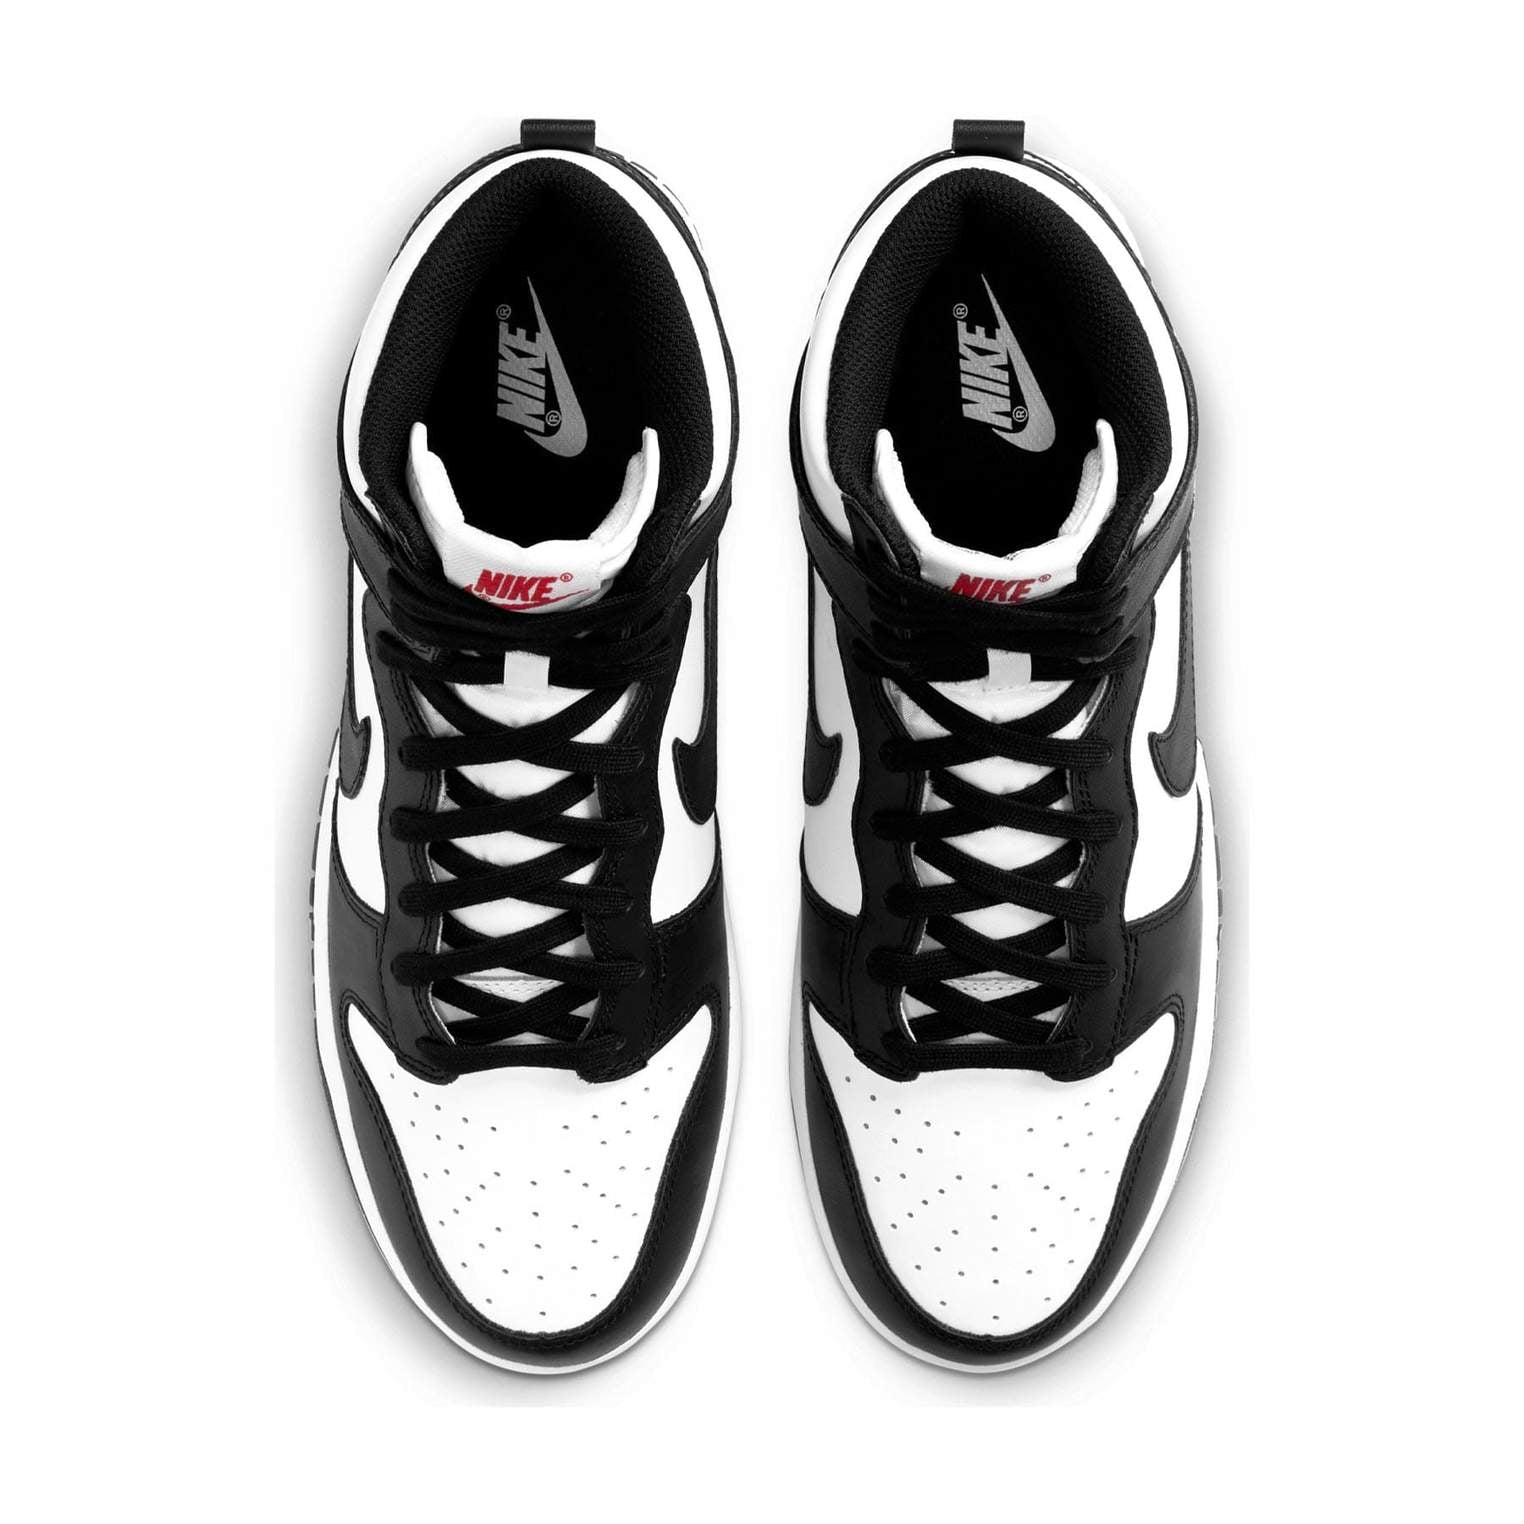 Double Boxed  274.99 Nike Dunk High Black White Double Boxed